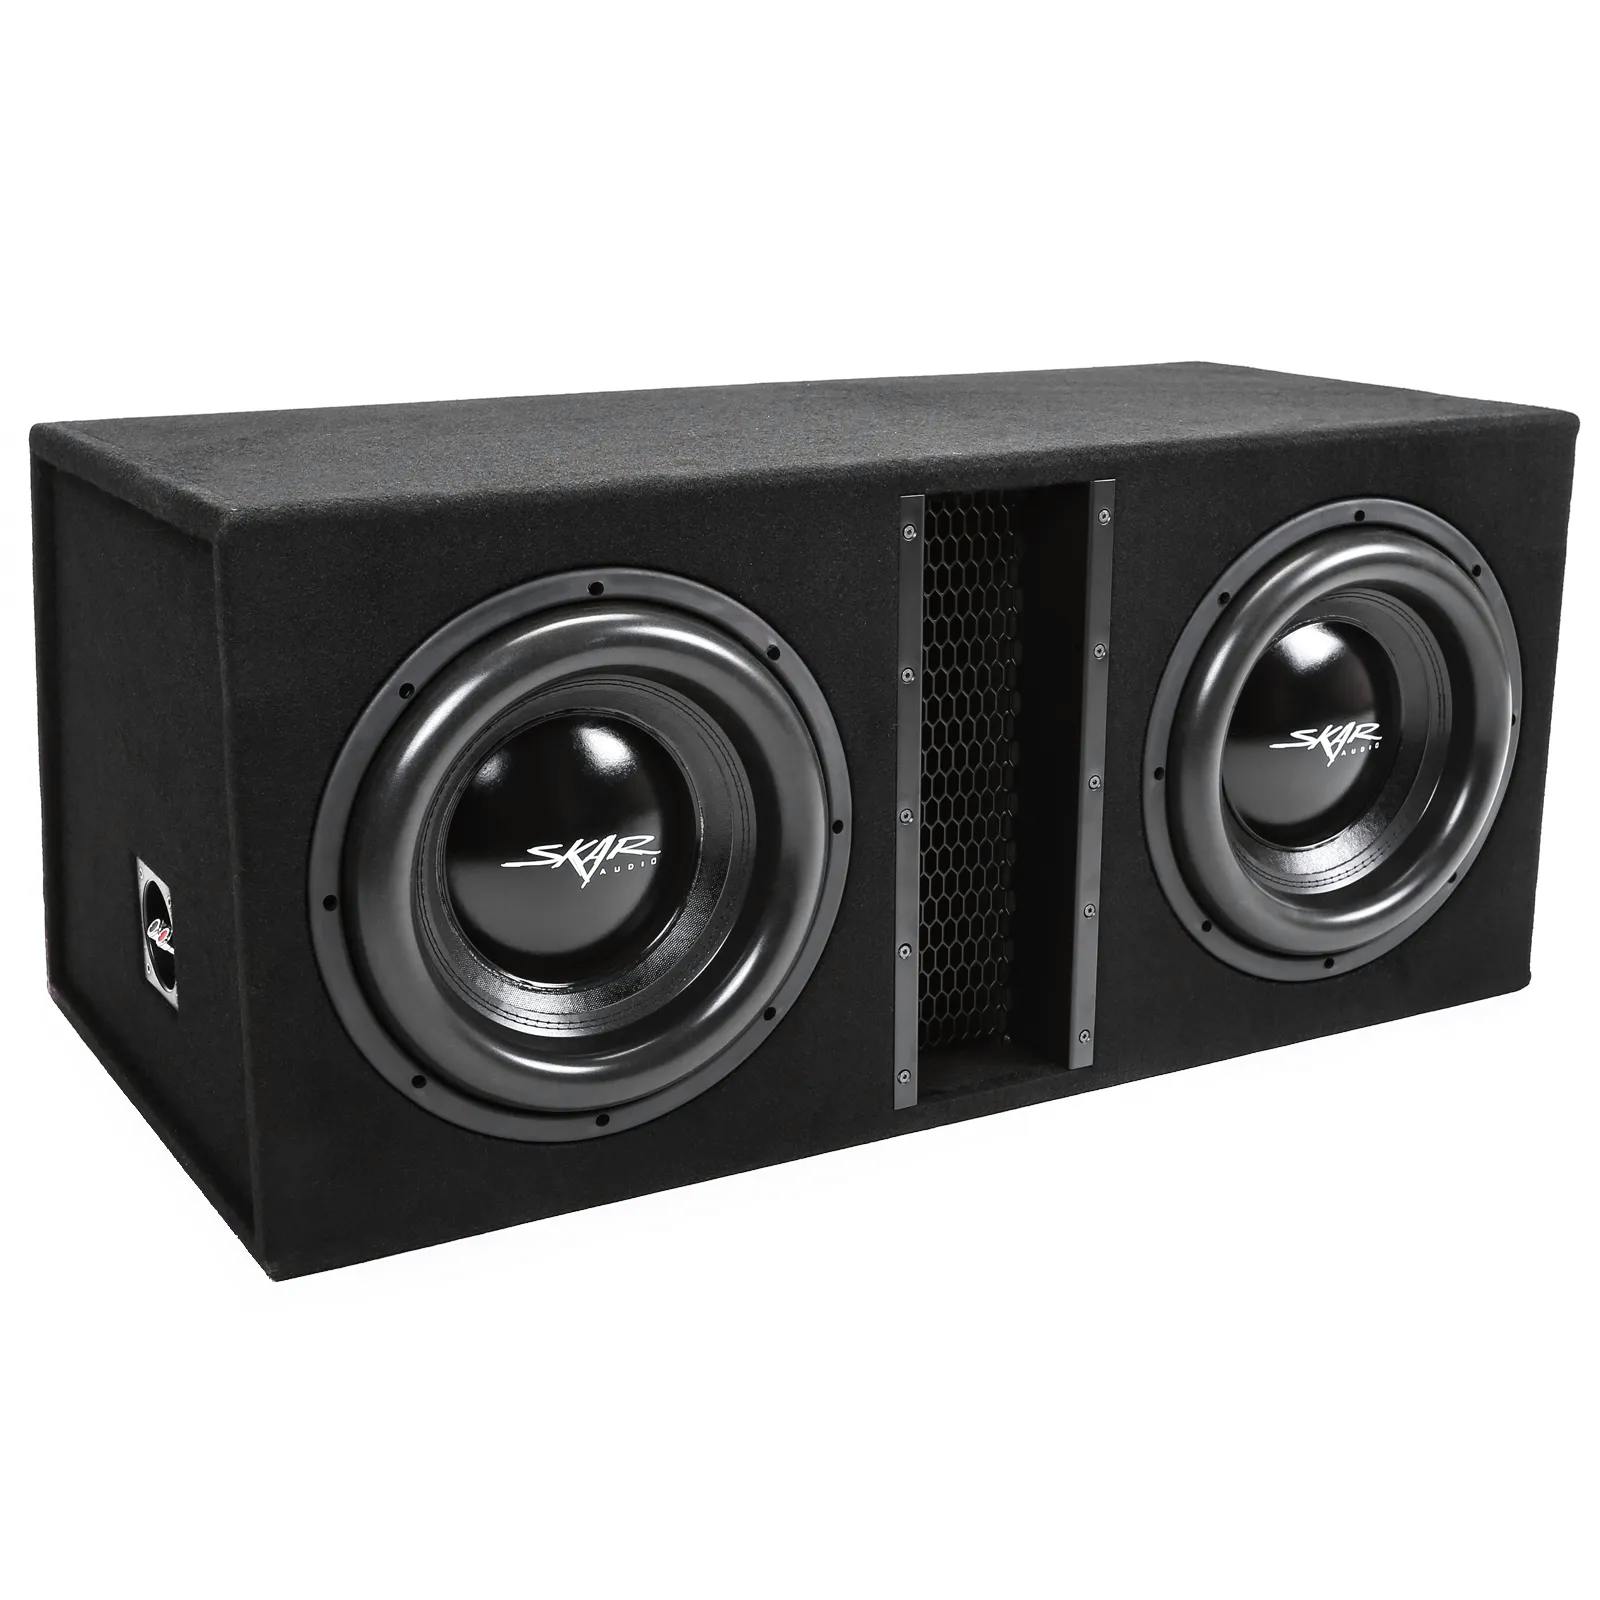 Featured Product Photo for EVL-2X12D4 | Dual 12" 5,000 Watt EVL Series Loaded Vented Subwoofer Enclosure